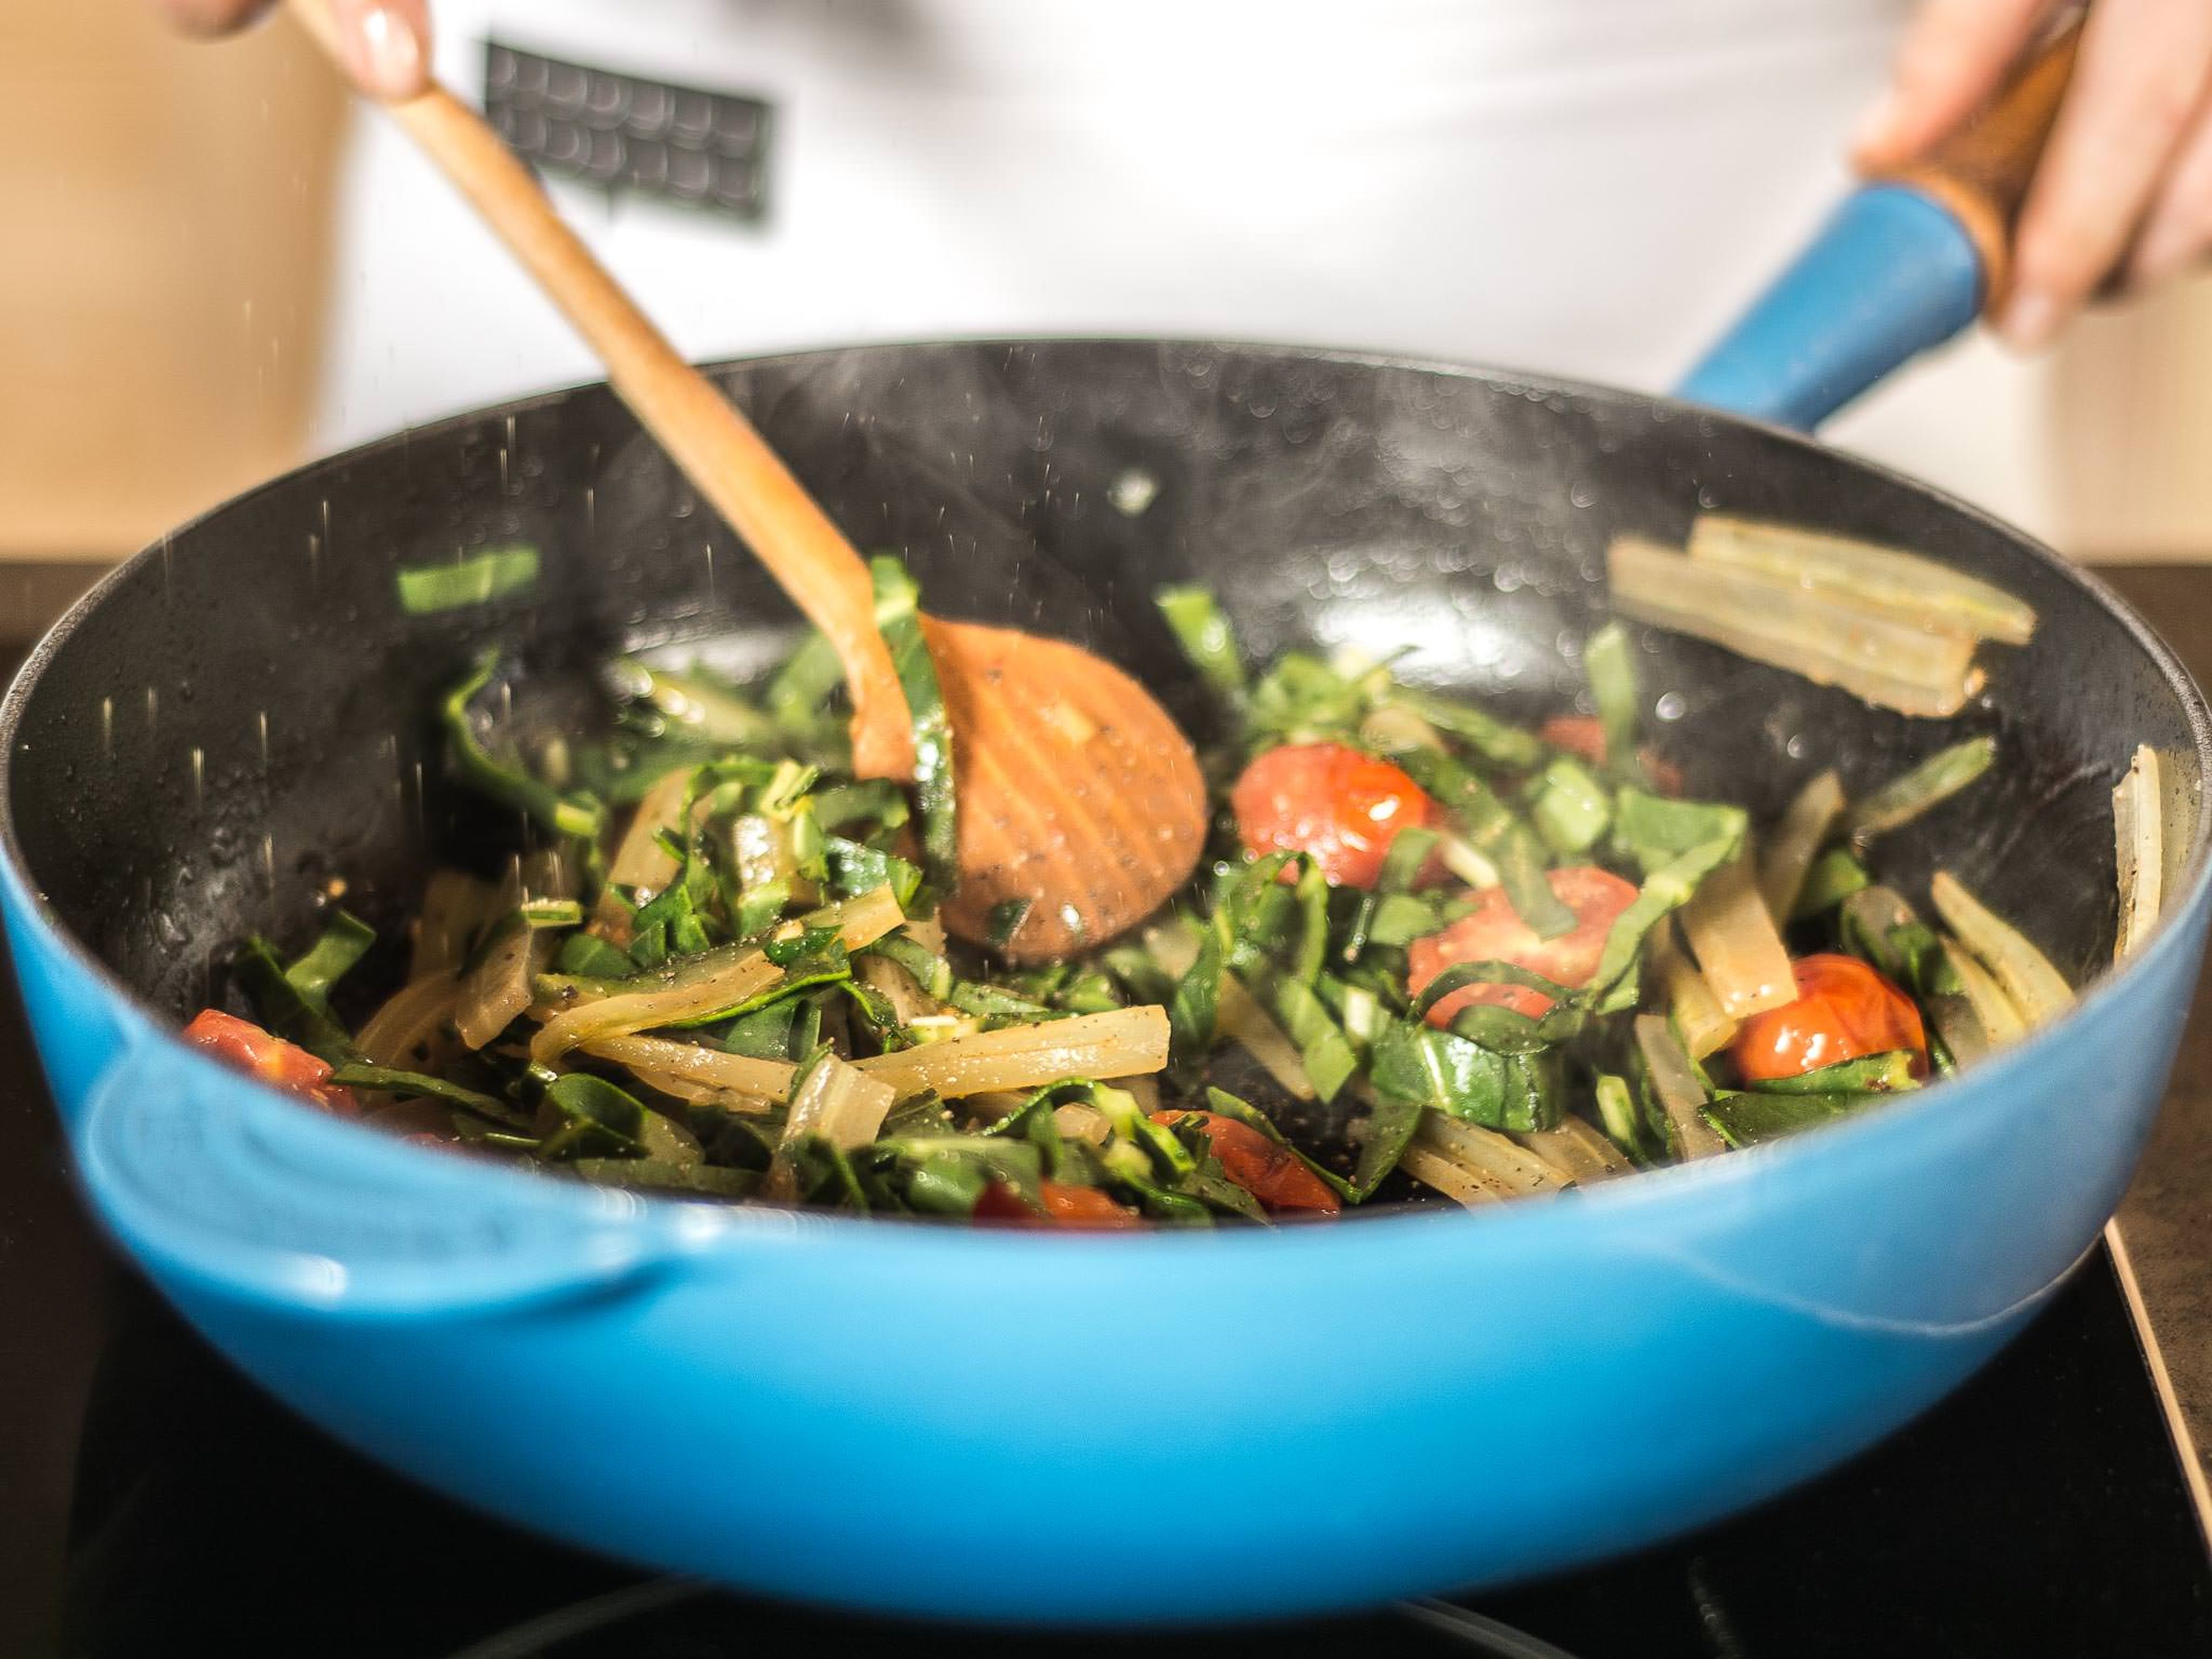 Sauté Swiss chard in some oil with a crushed garlic clove. Add cherry tomatoes and sauté, seasoning with nutmeg and salt and pepper. Serve by placing a baked fish fillet on top of Swiss chard.